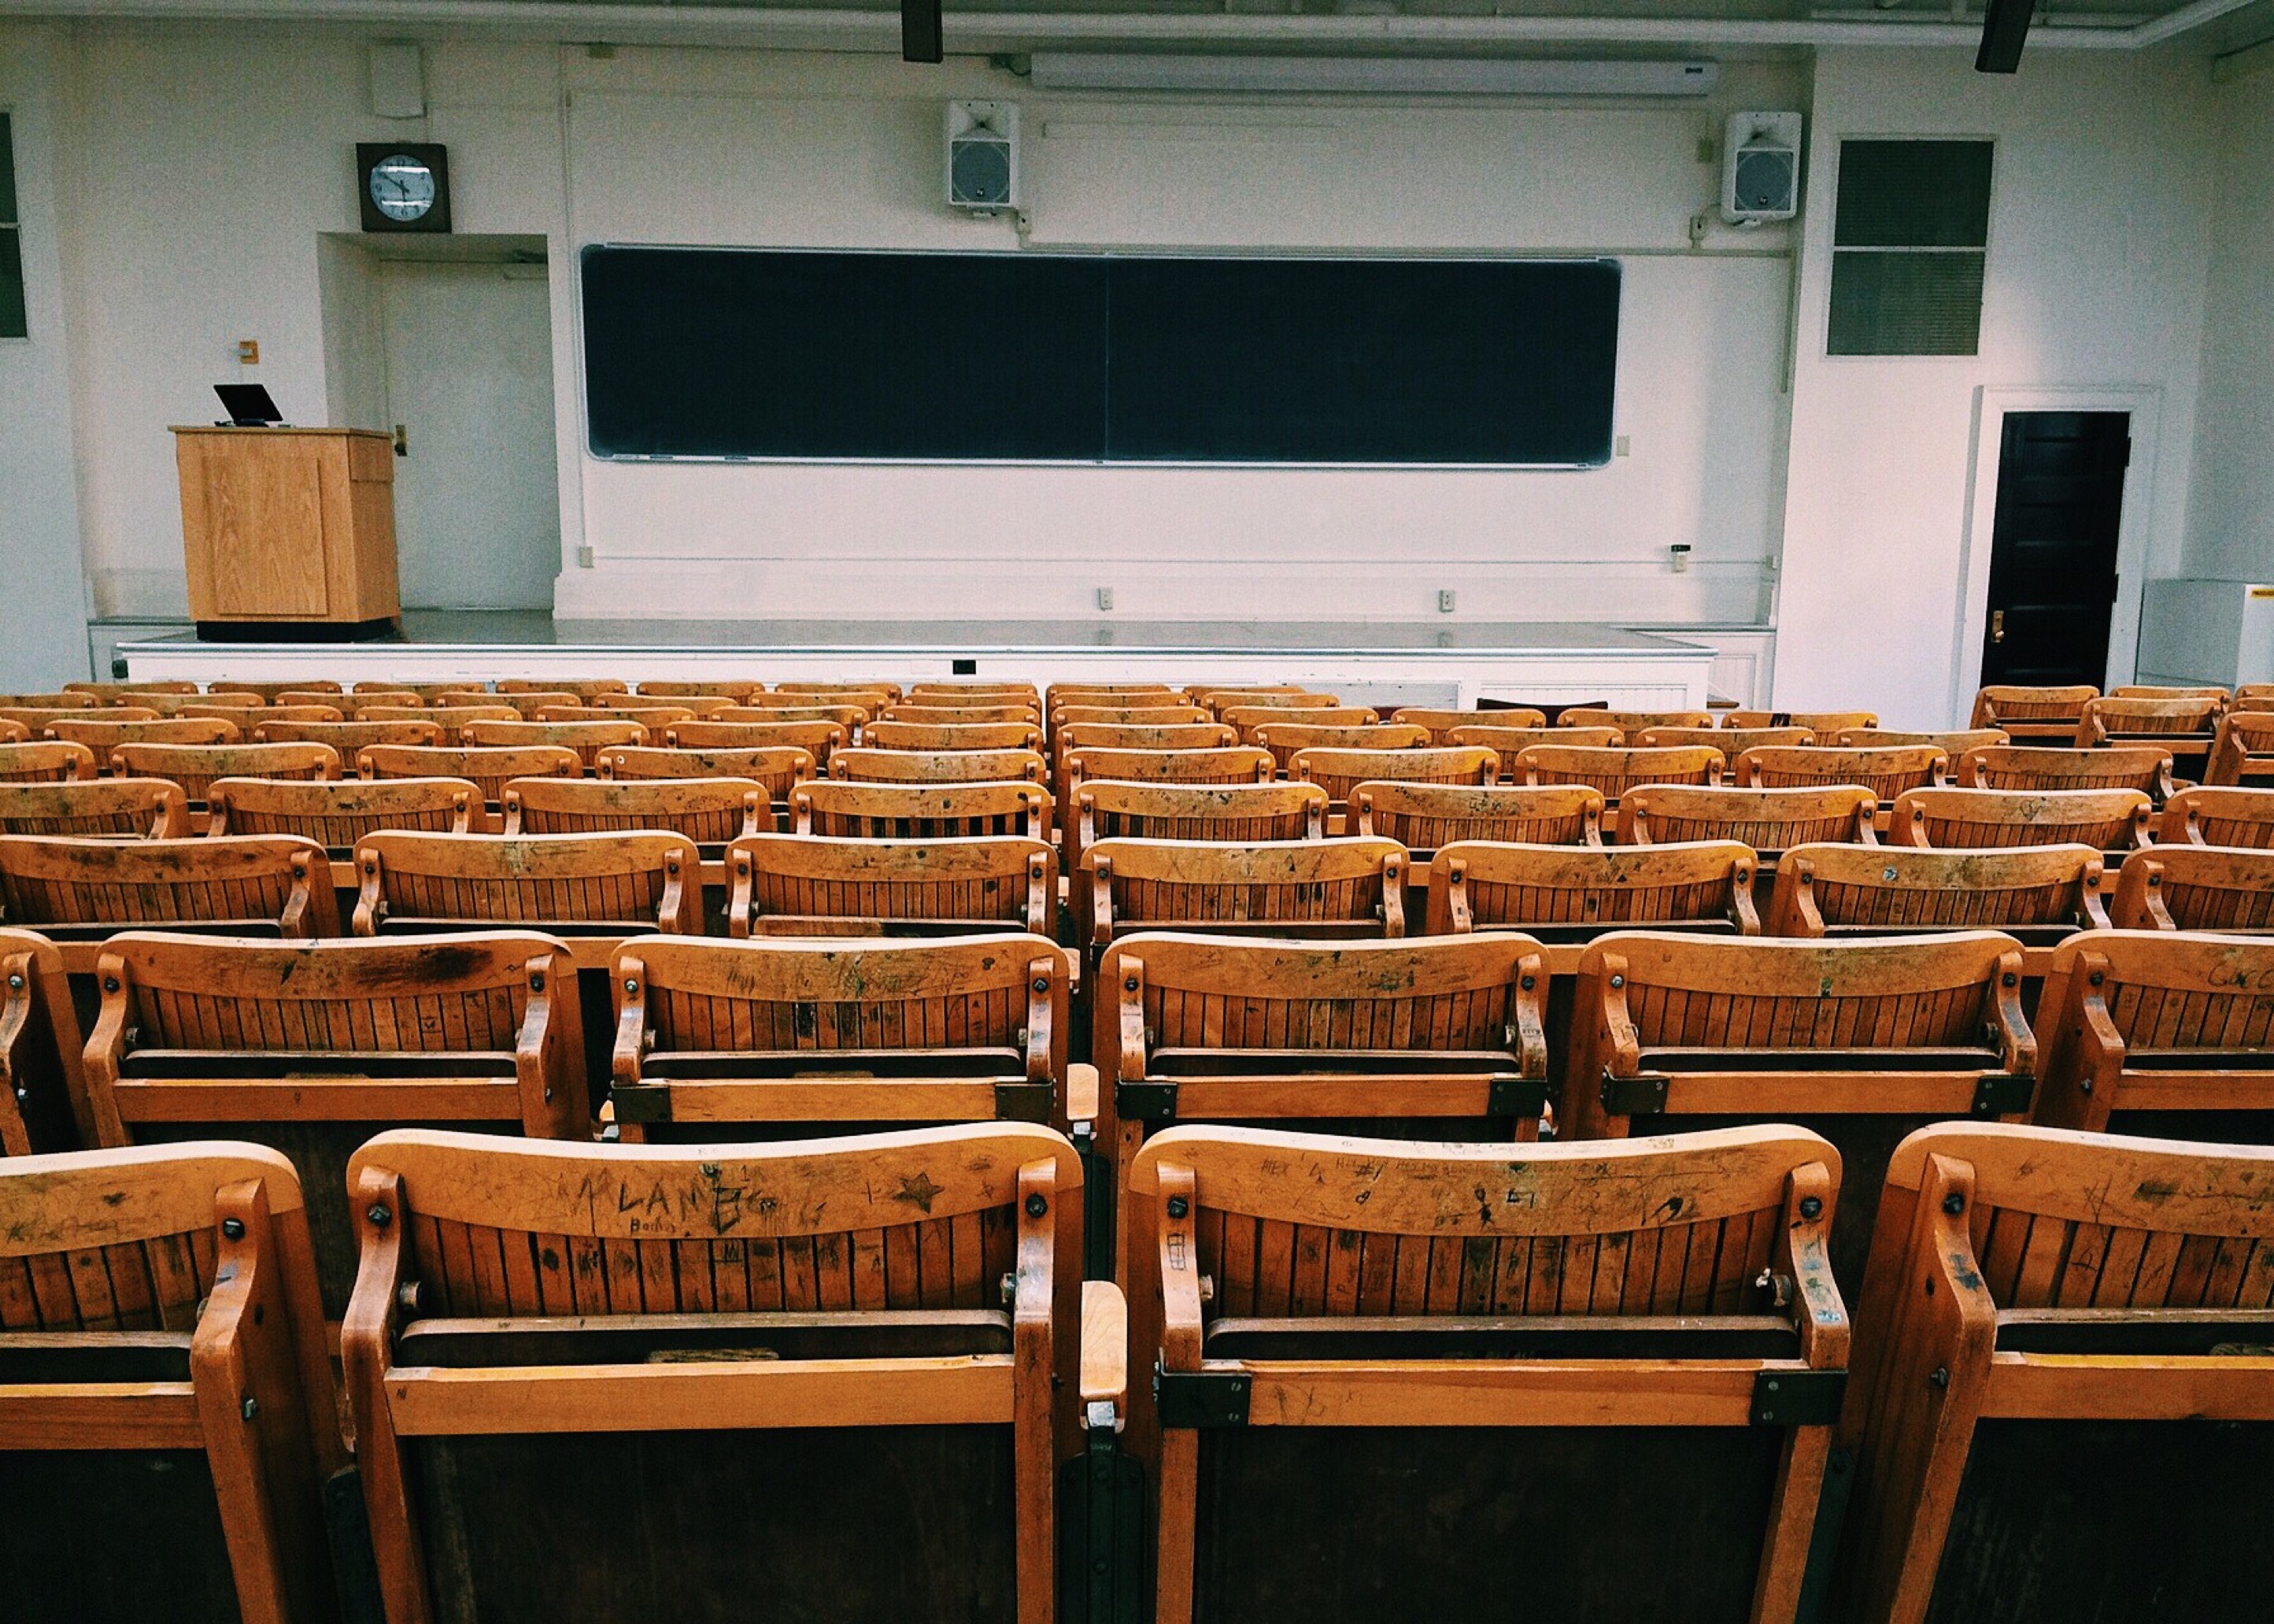 An empty classroom with wooden chairs